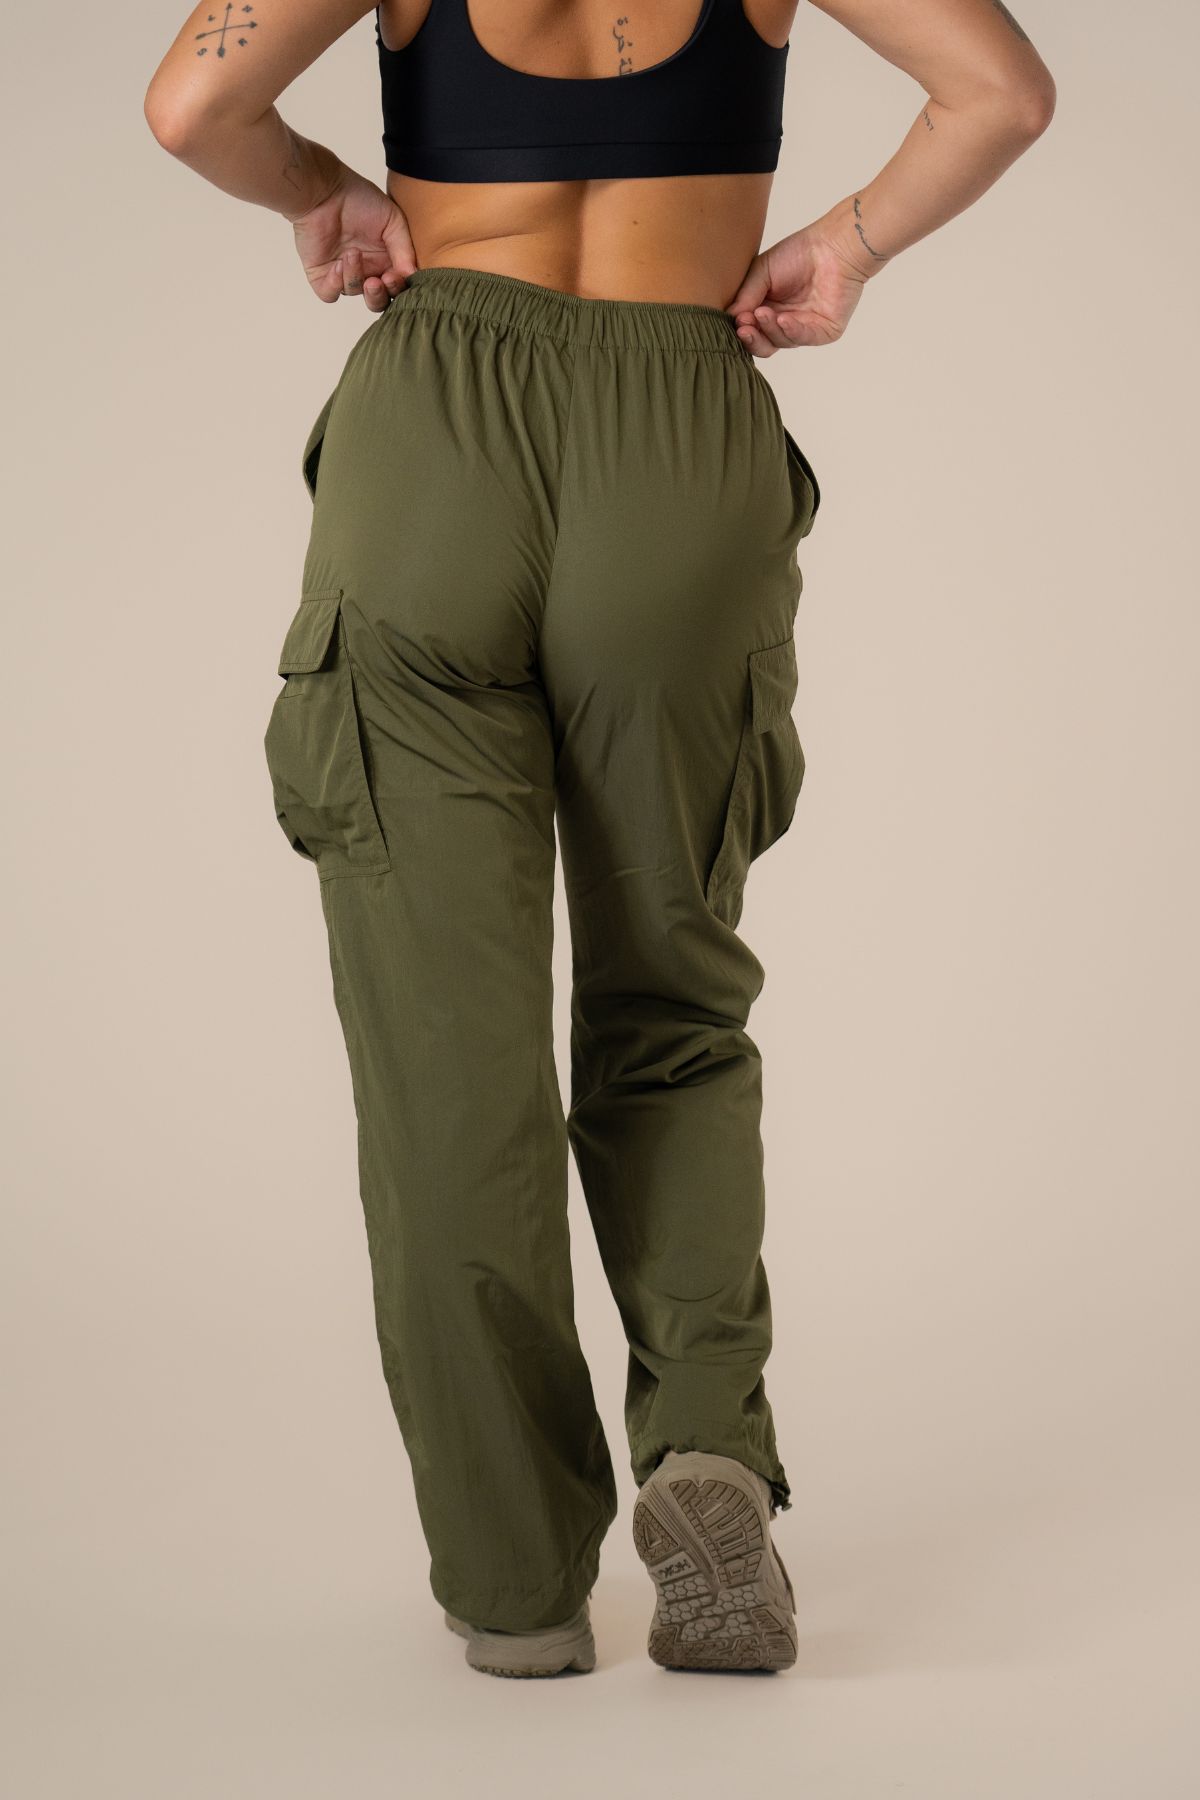 Reef cargo pants - Army